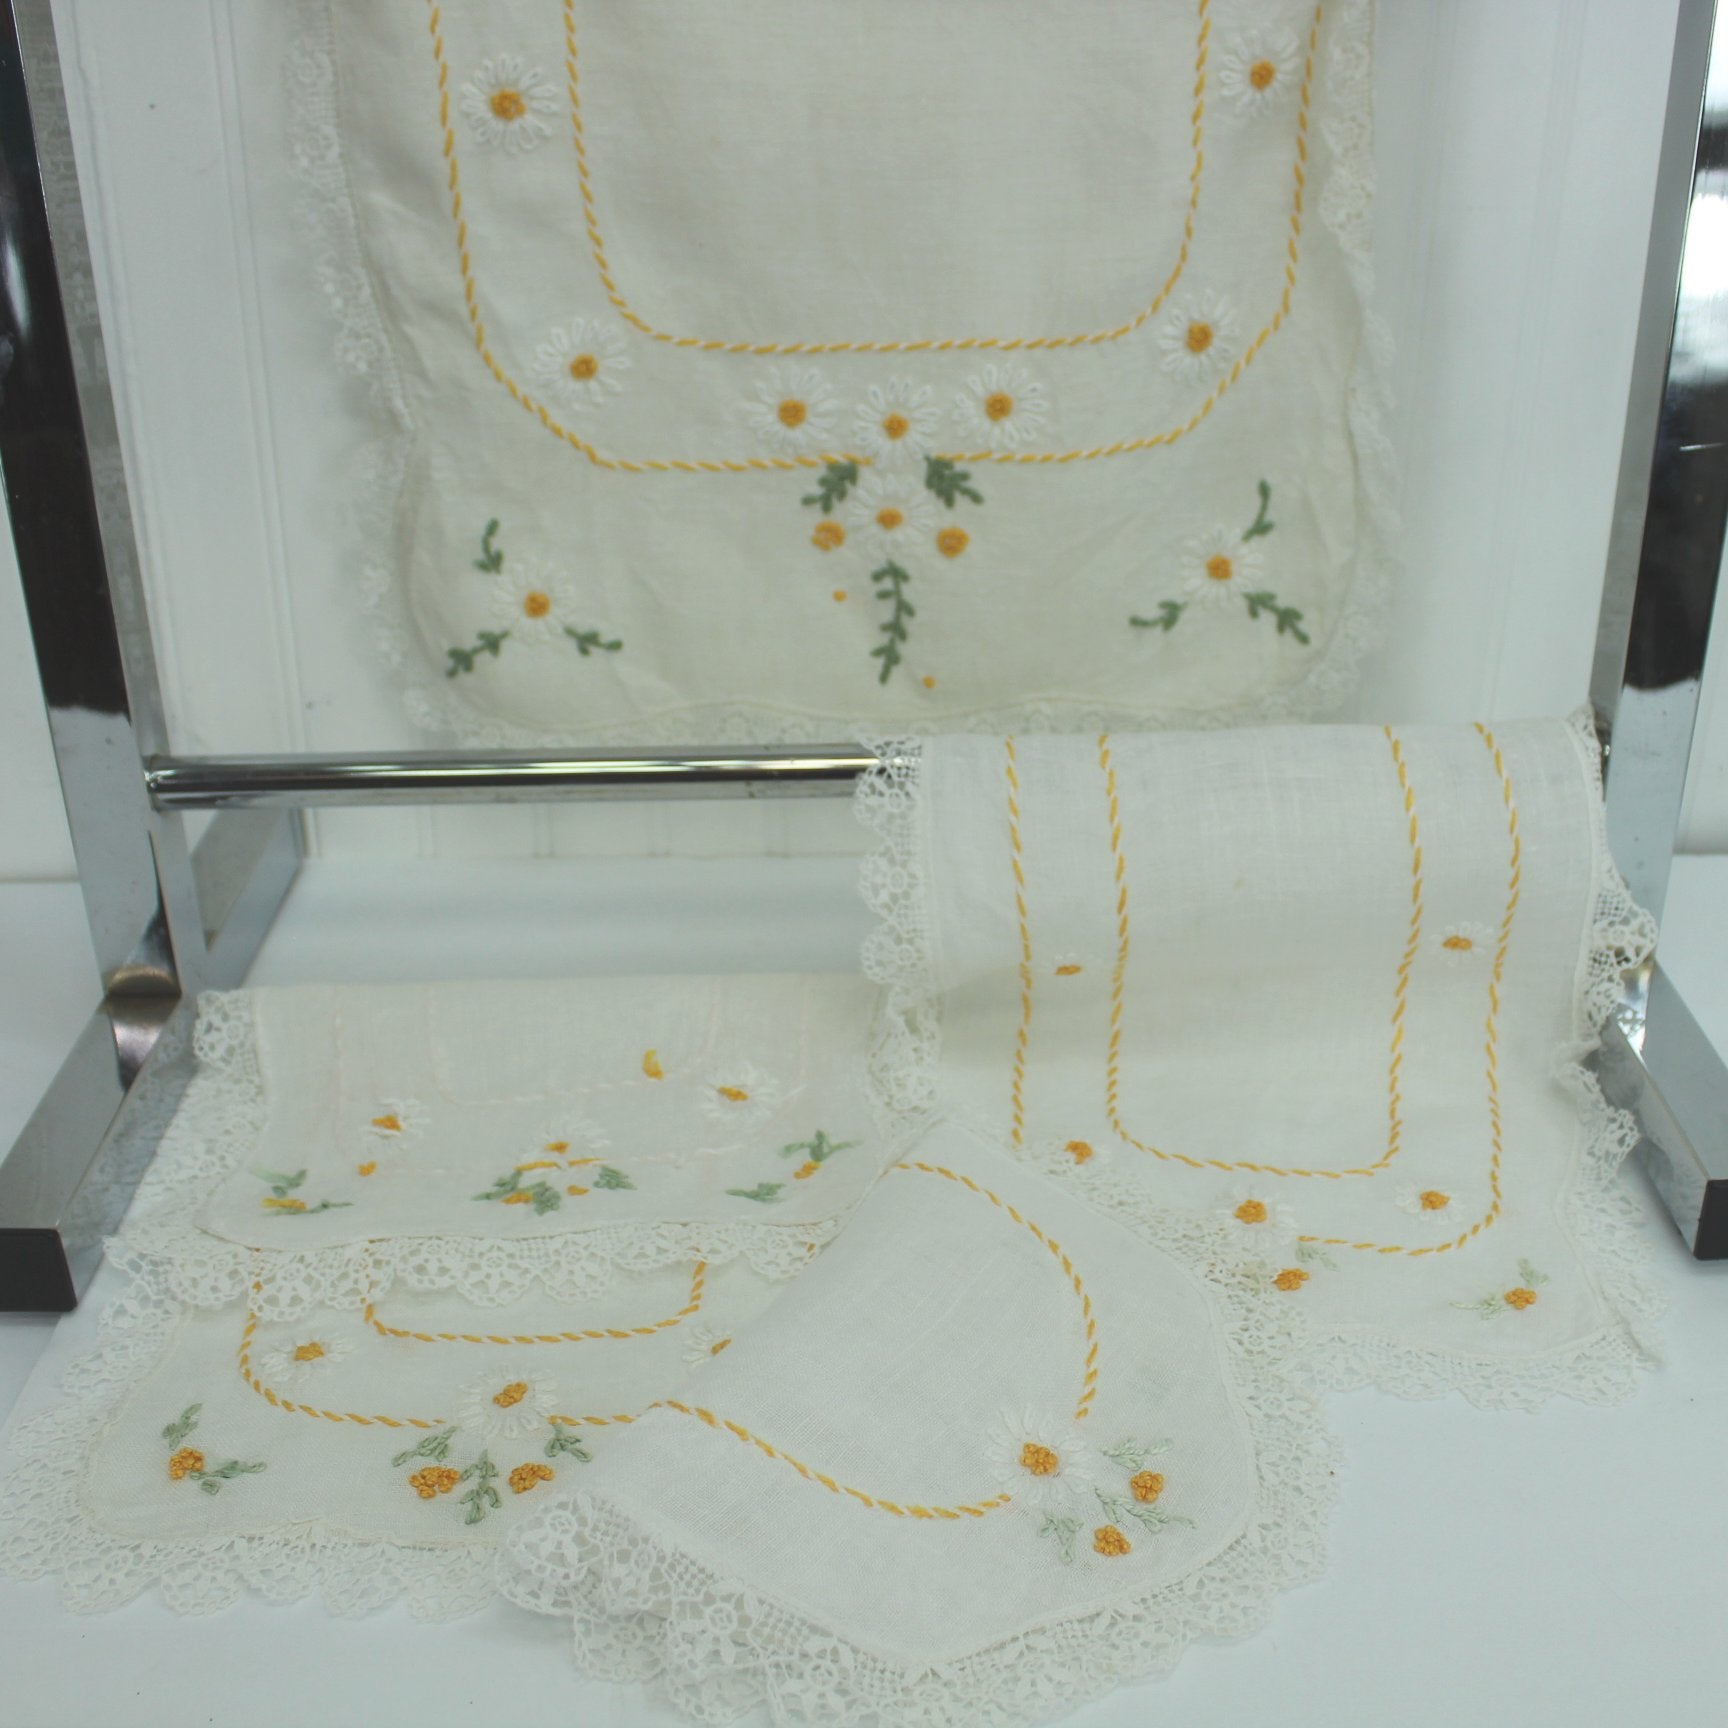 Collection 4 Embroidered Fine Linen Table Pieces White with Daisies Lace Elegant Vintage